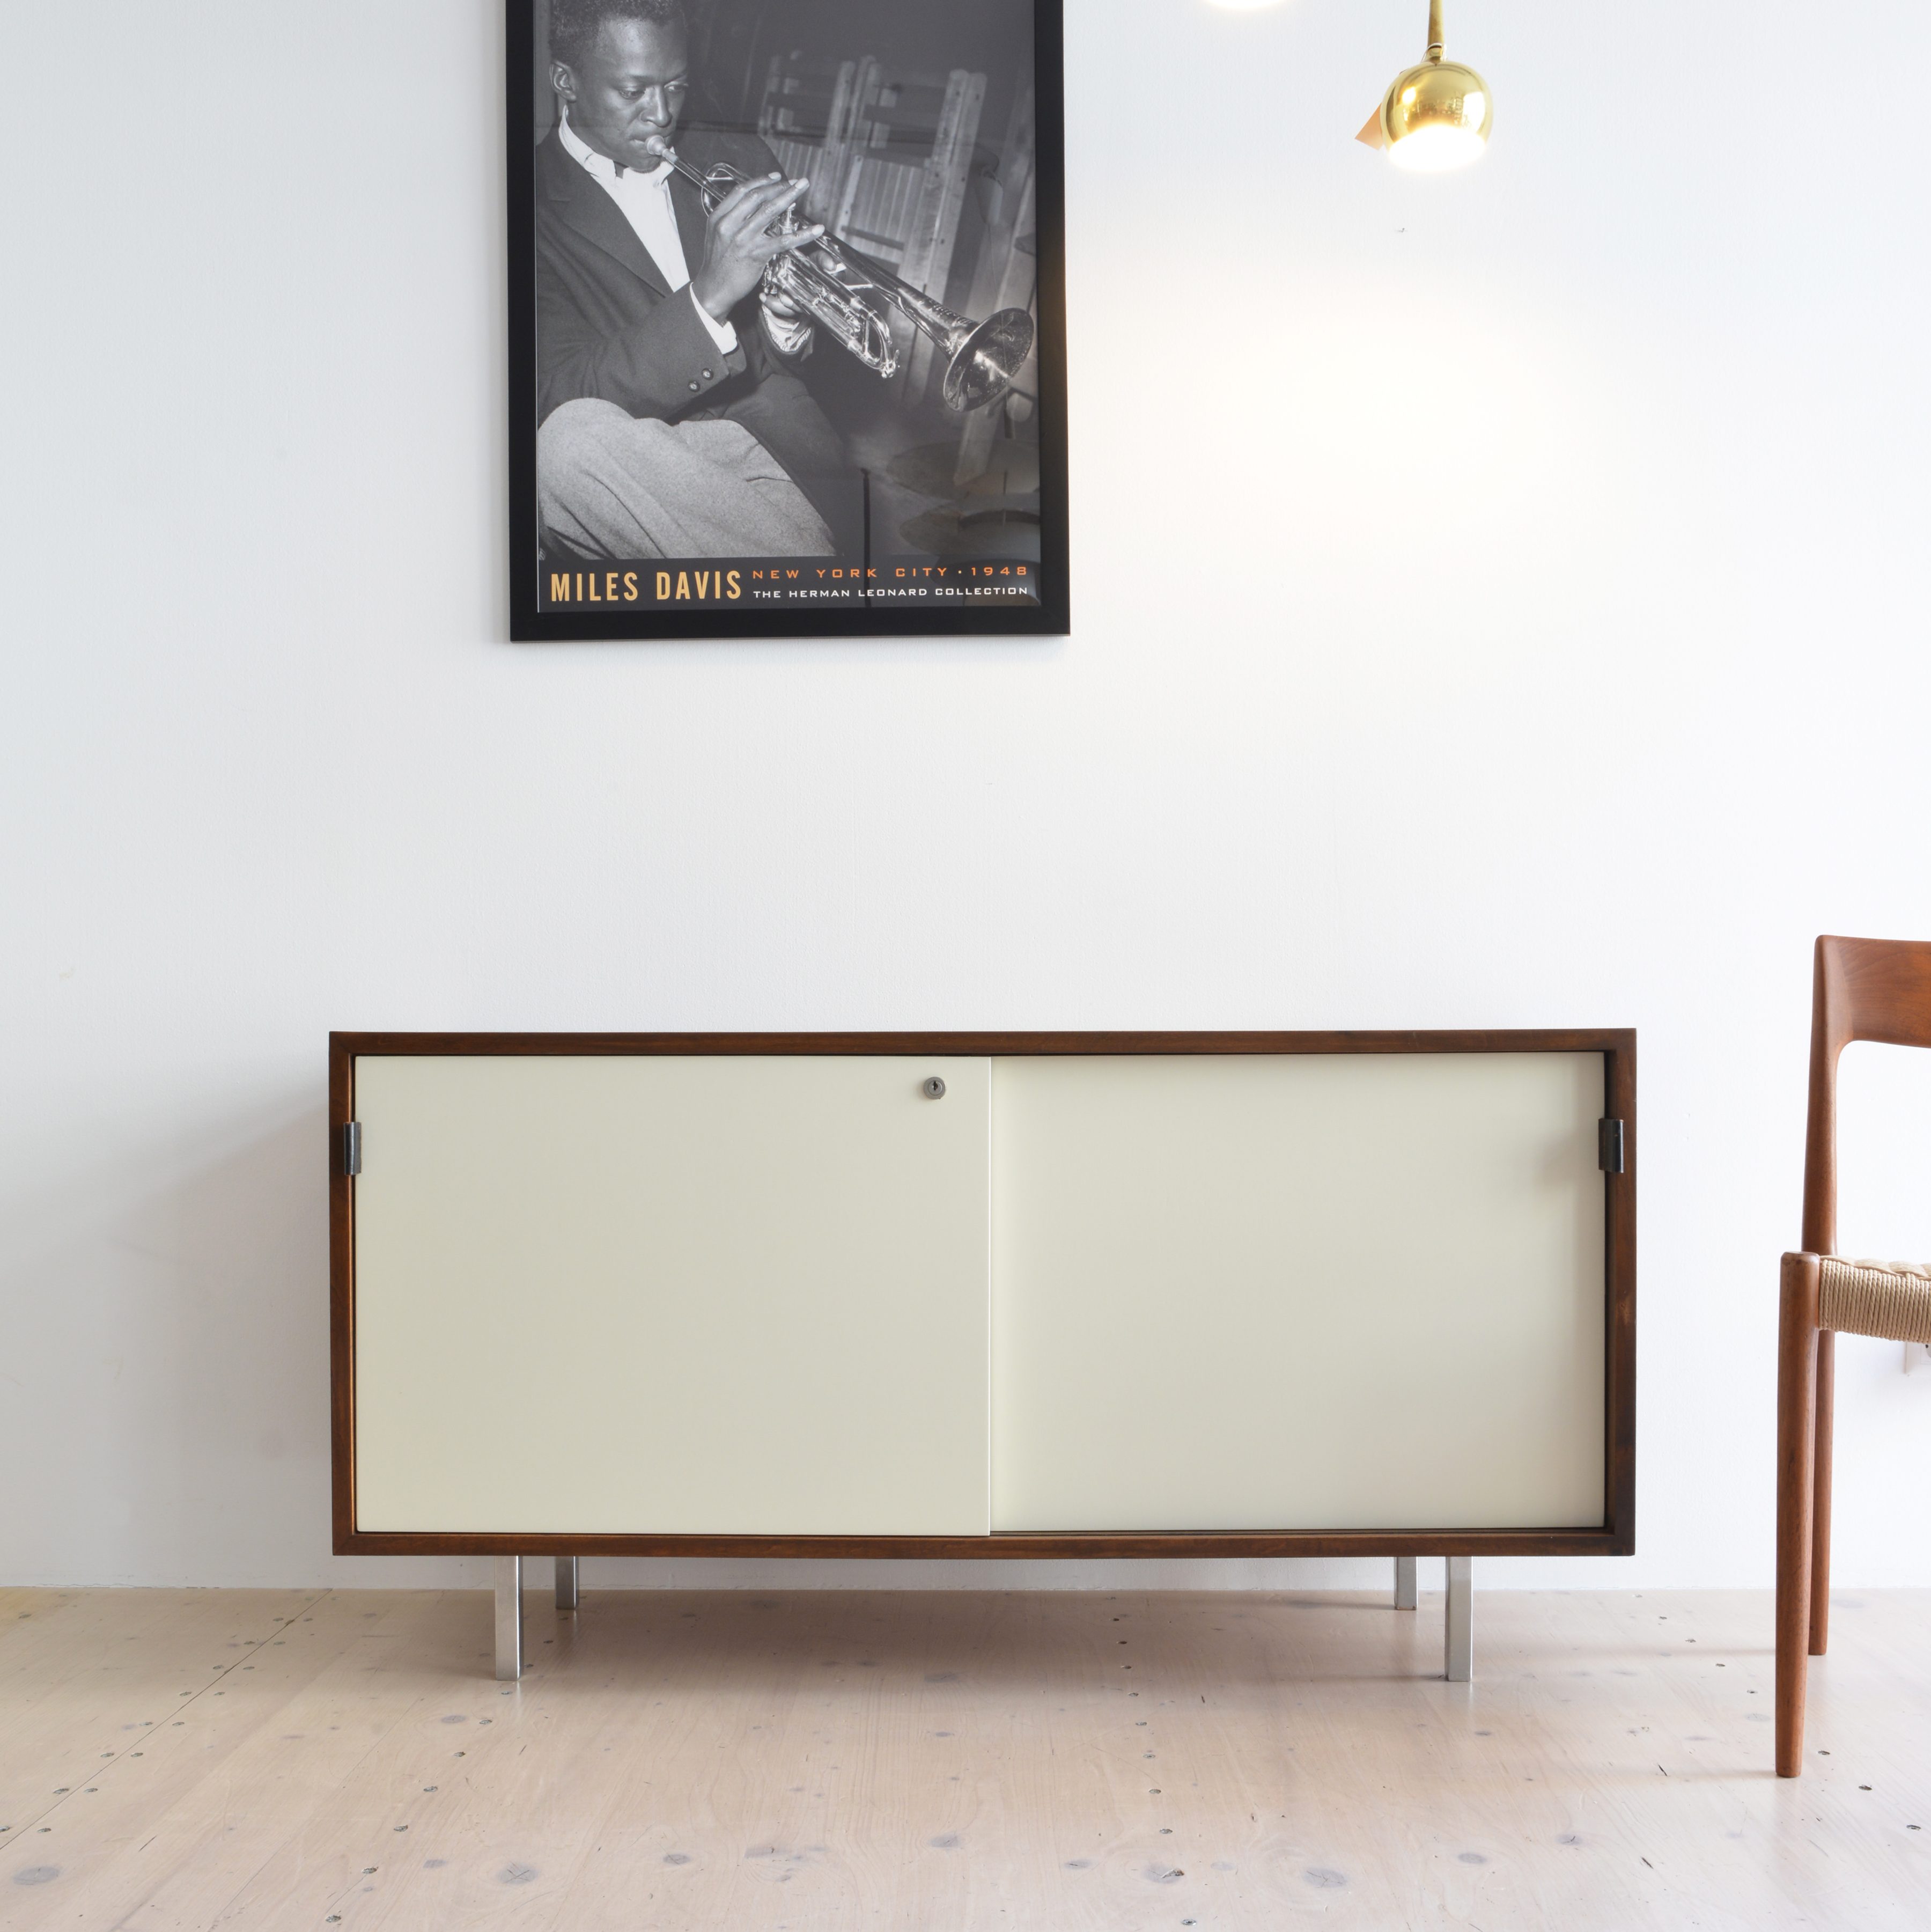 Florence Knoll Sideboard in Beige by Florence Knoll, Knoll International for Wohnbedarf - Switzerland, 1960s. Available at heyday möbel, Grubenstrasse 19, 8045 Zürich.